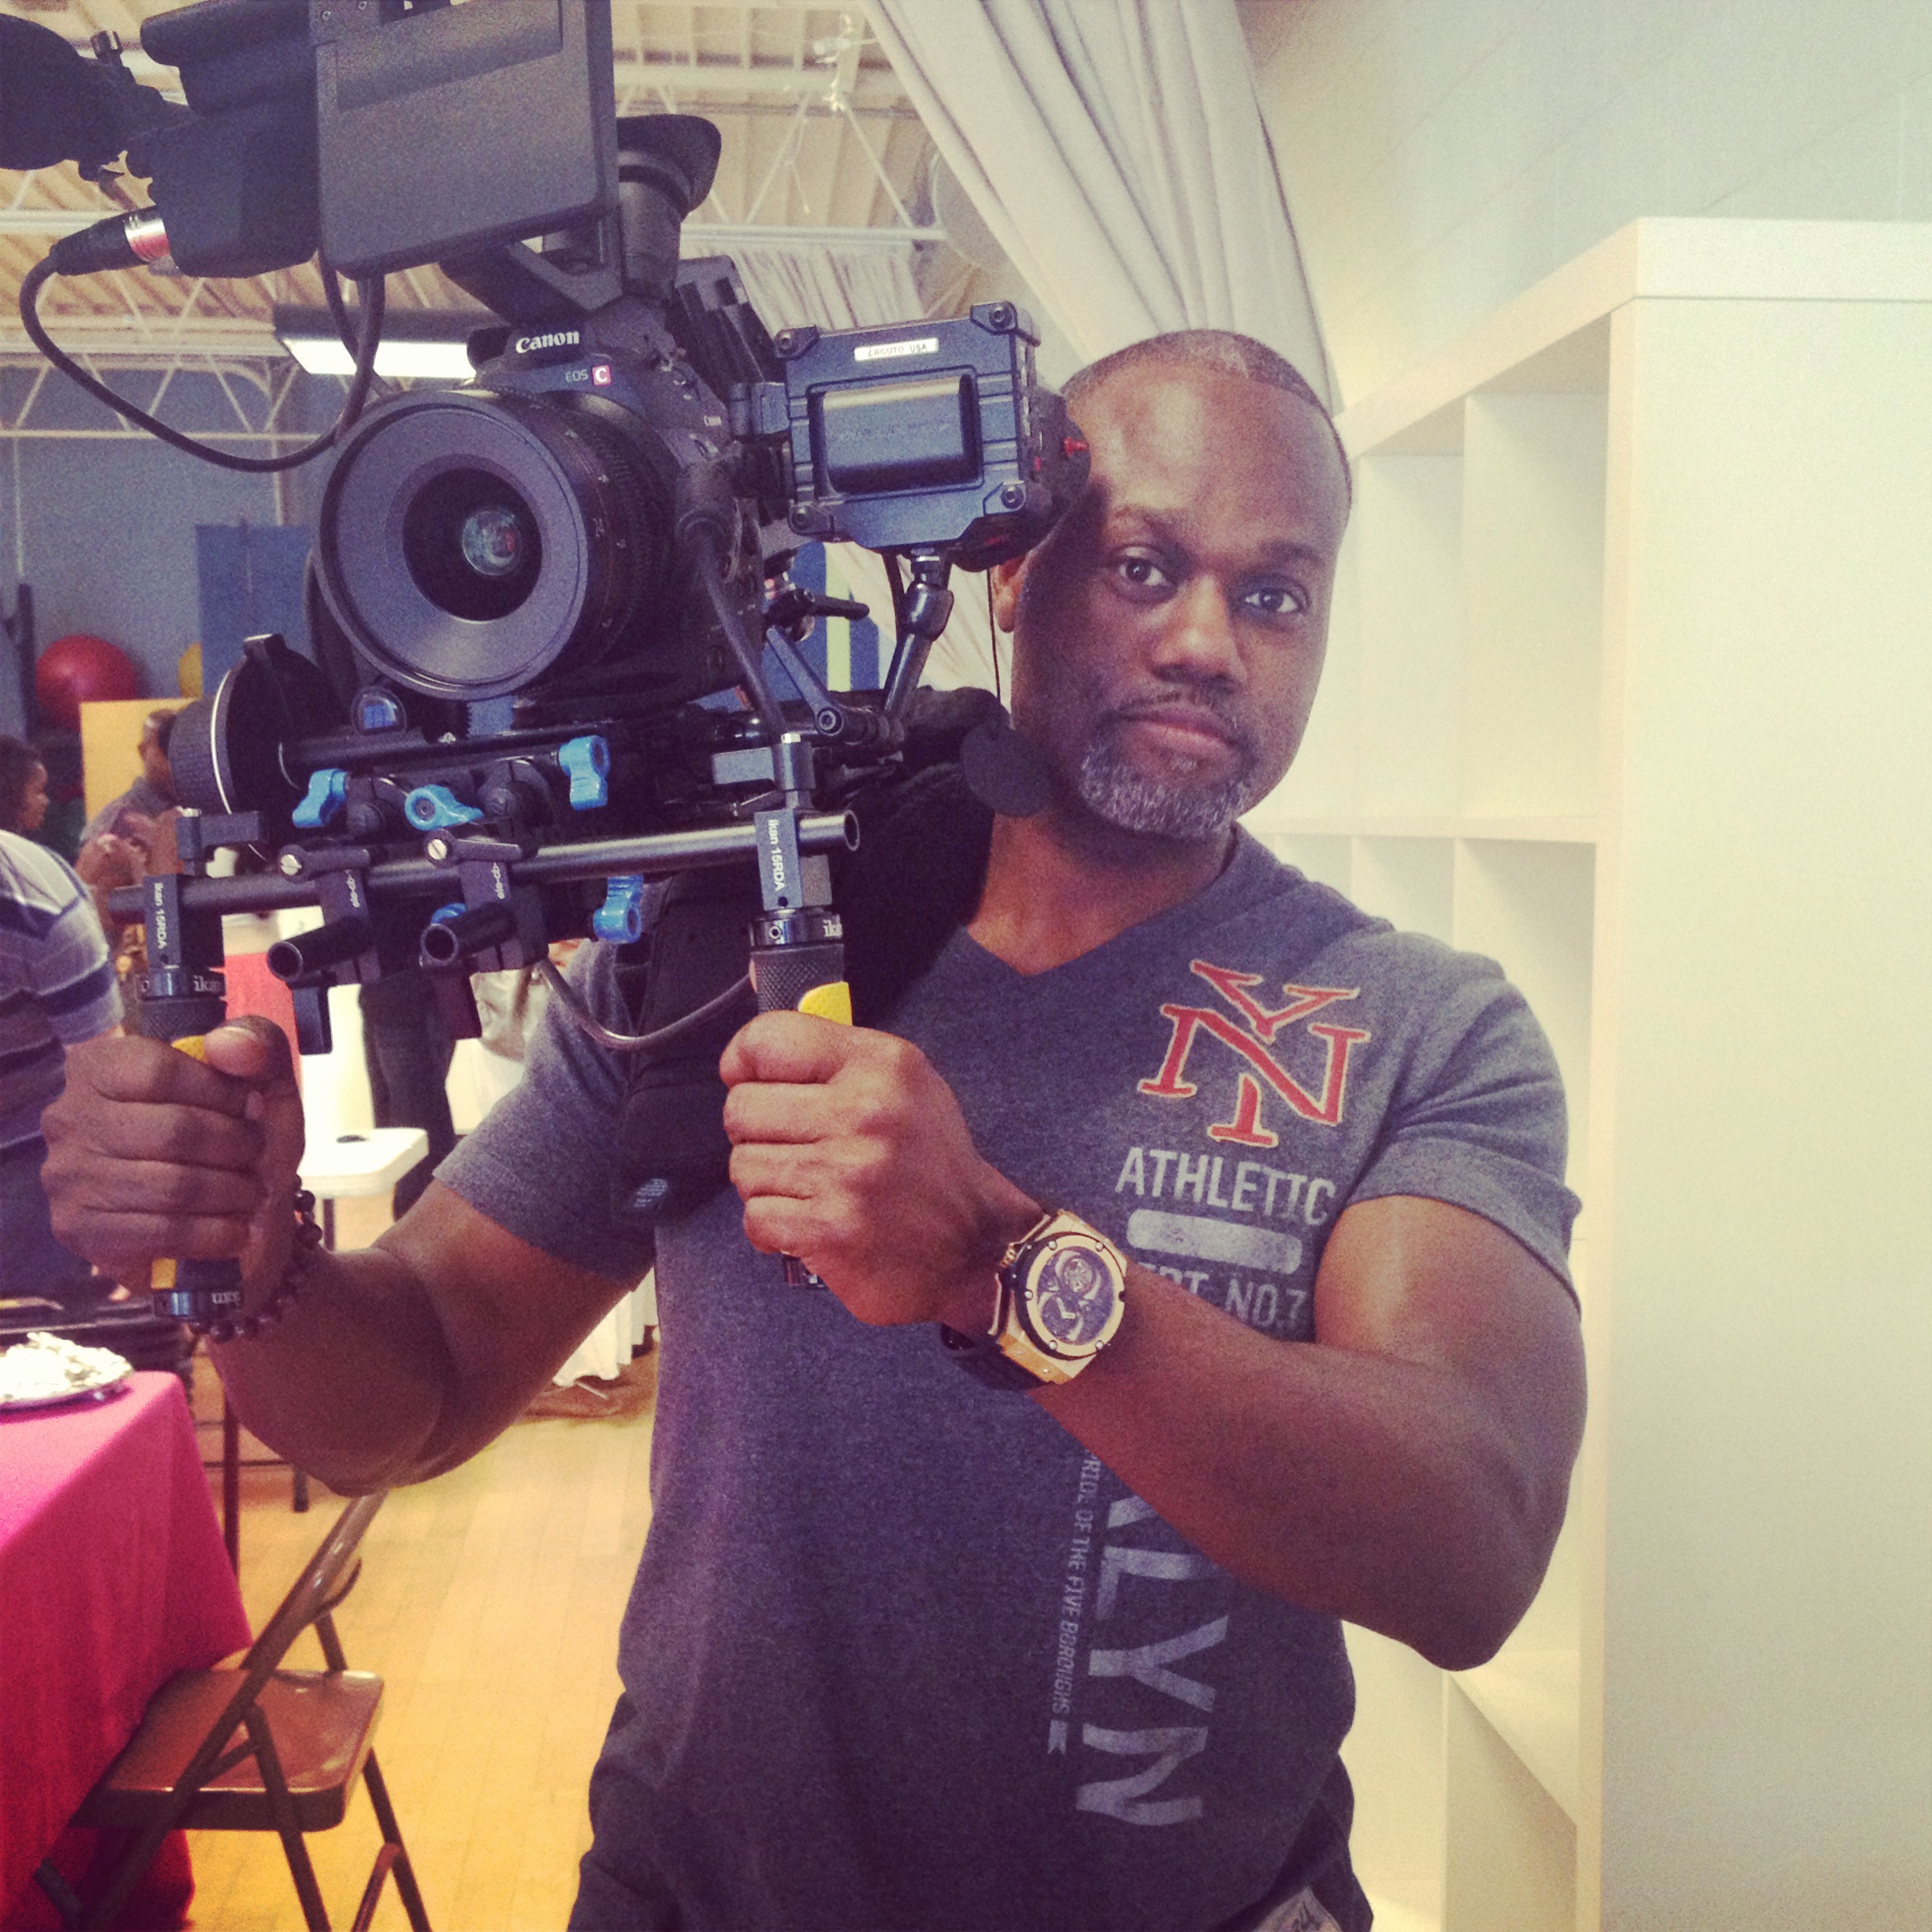 Me and my Canon C300. We are getting some awesome footage from it! I love this camera!!